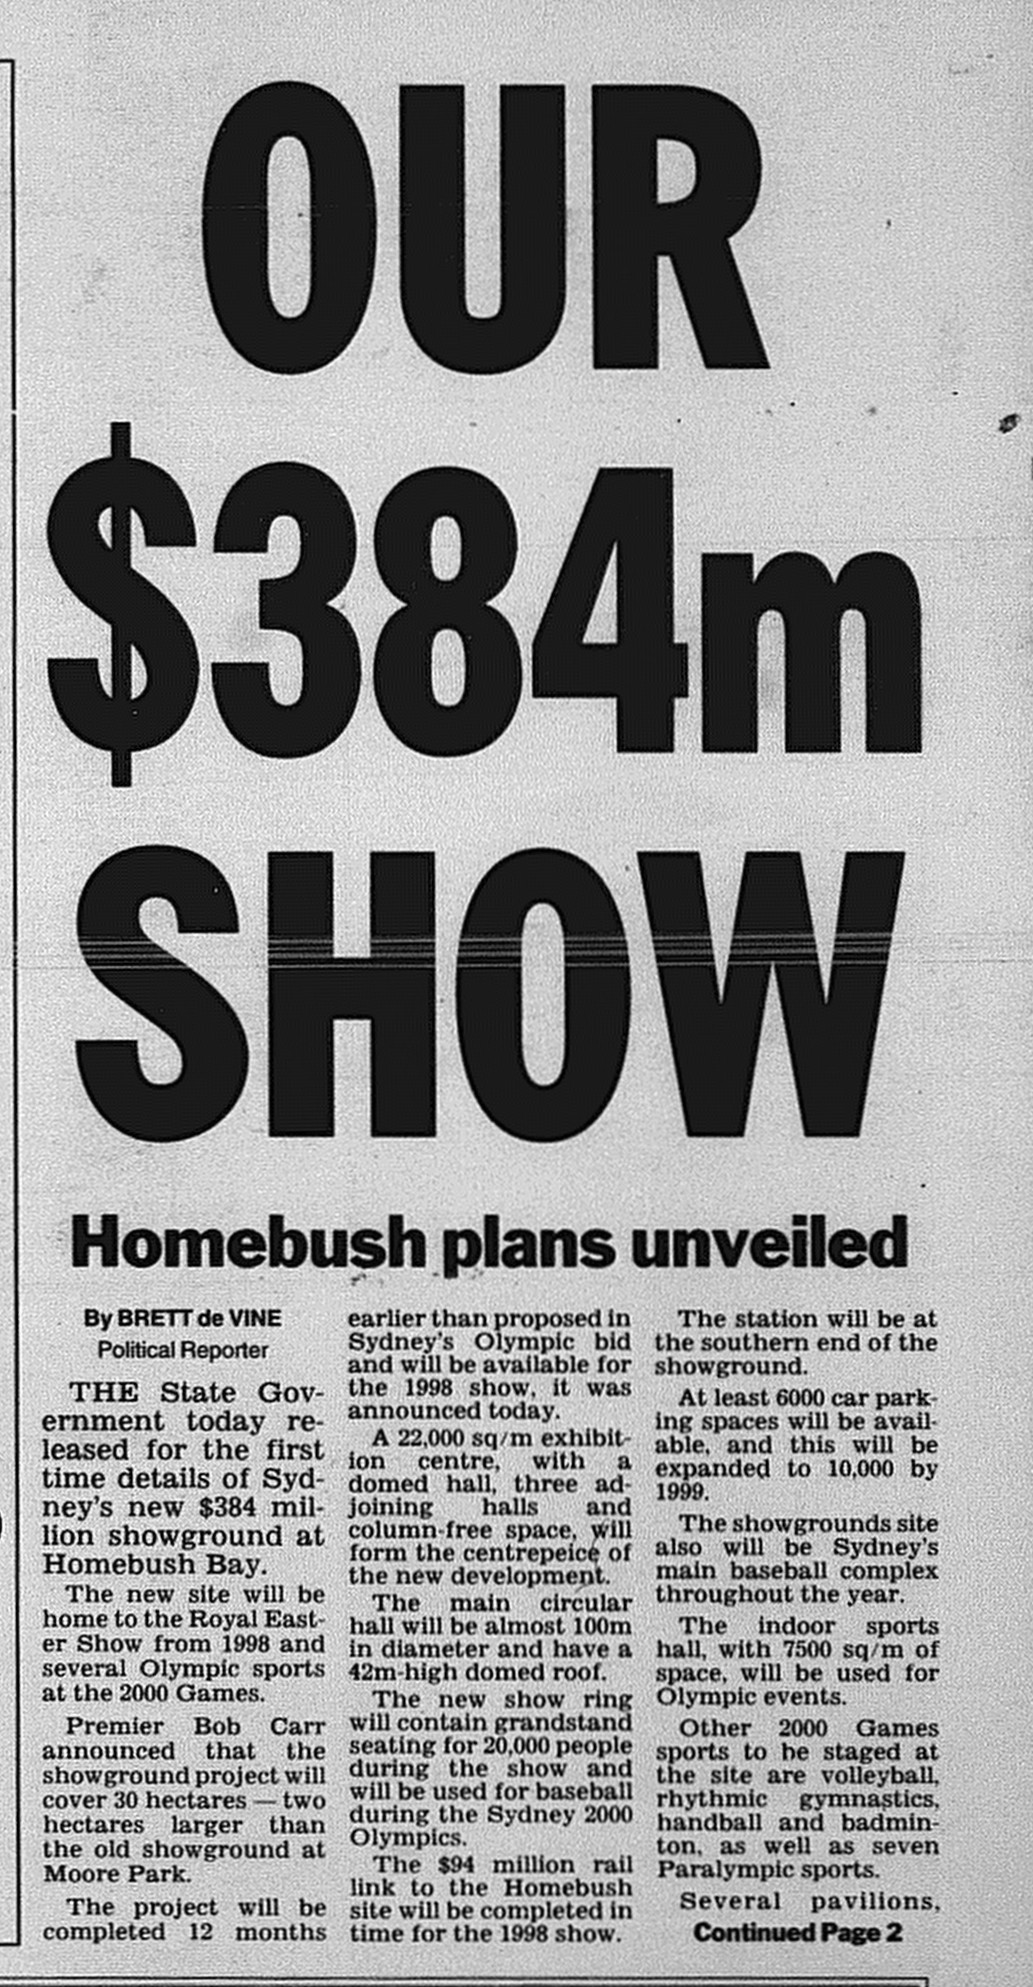 Sydney Showgrounds October 22 1996 daily telegraph 1-2 (1)